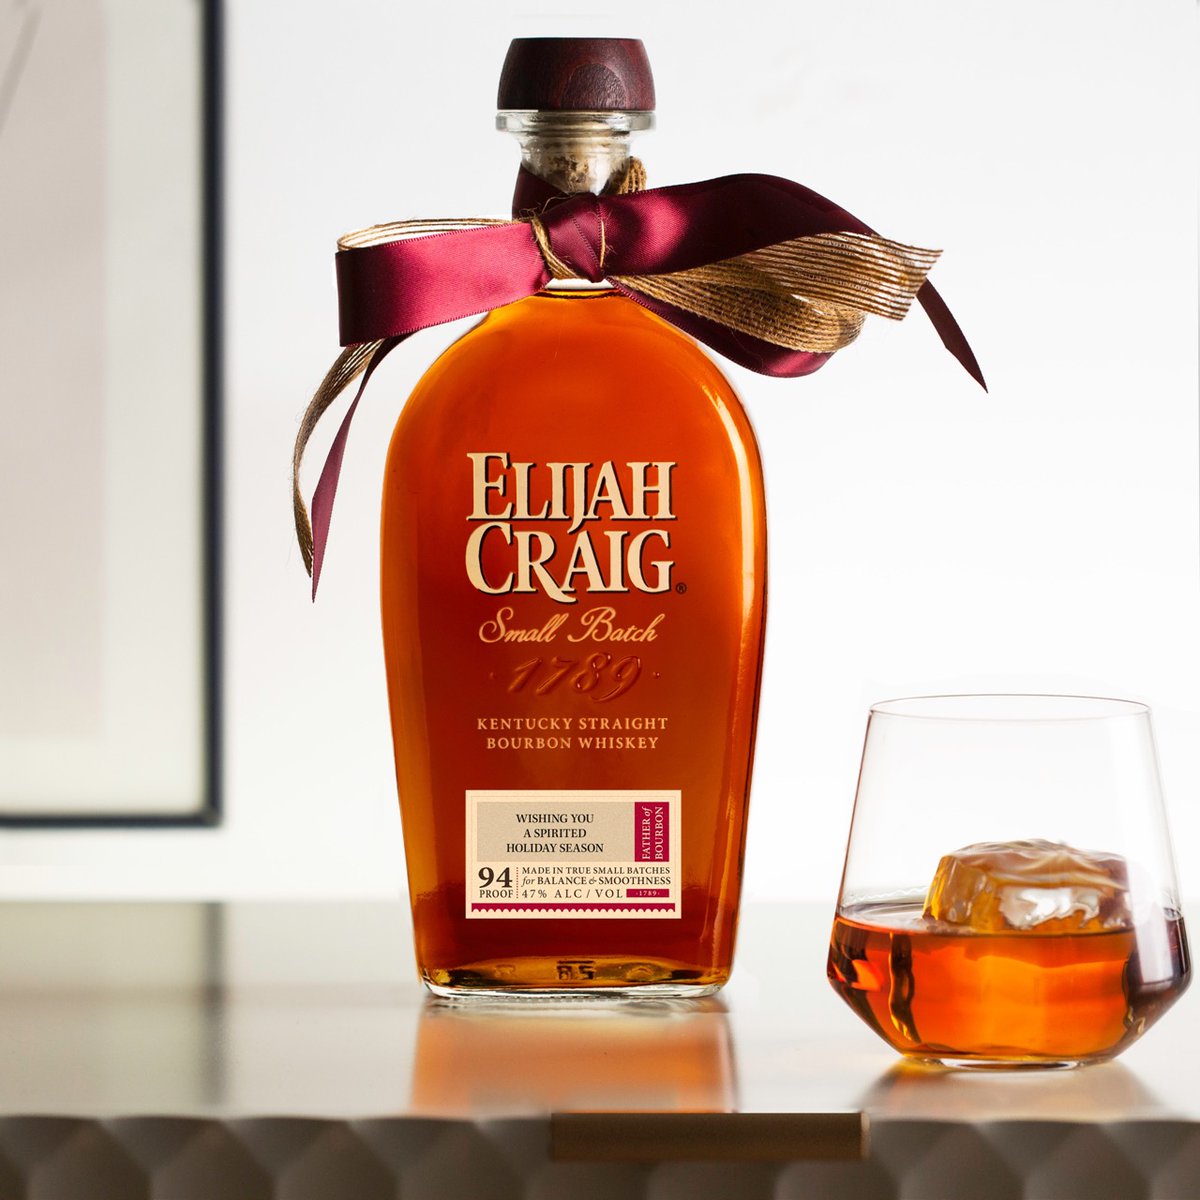 Looking for a way to get into the spirit of the season? Create a one-of-a-kind Elijah Craig Small Batch label. Learn how to make one on our website: loom.ly/XfKymJo